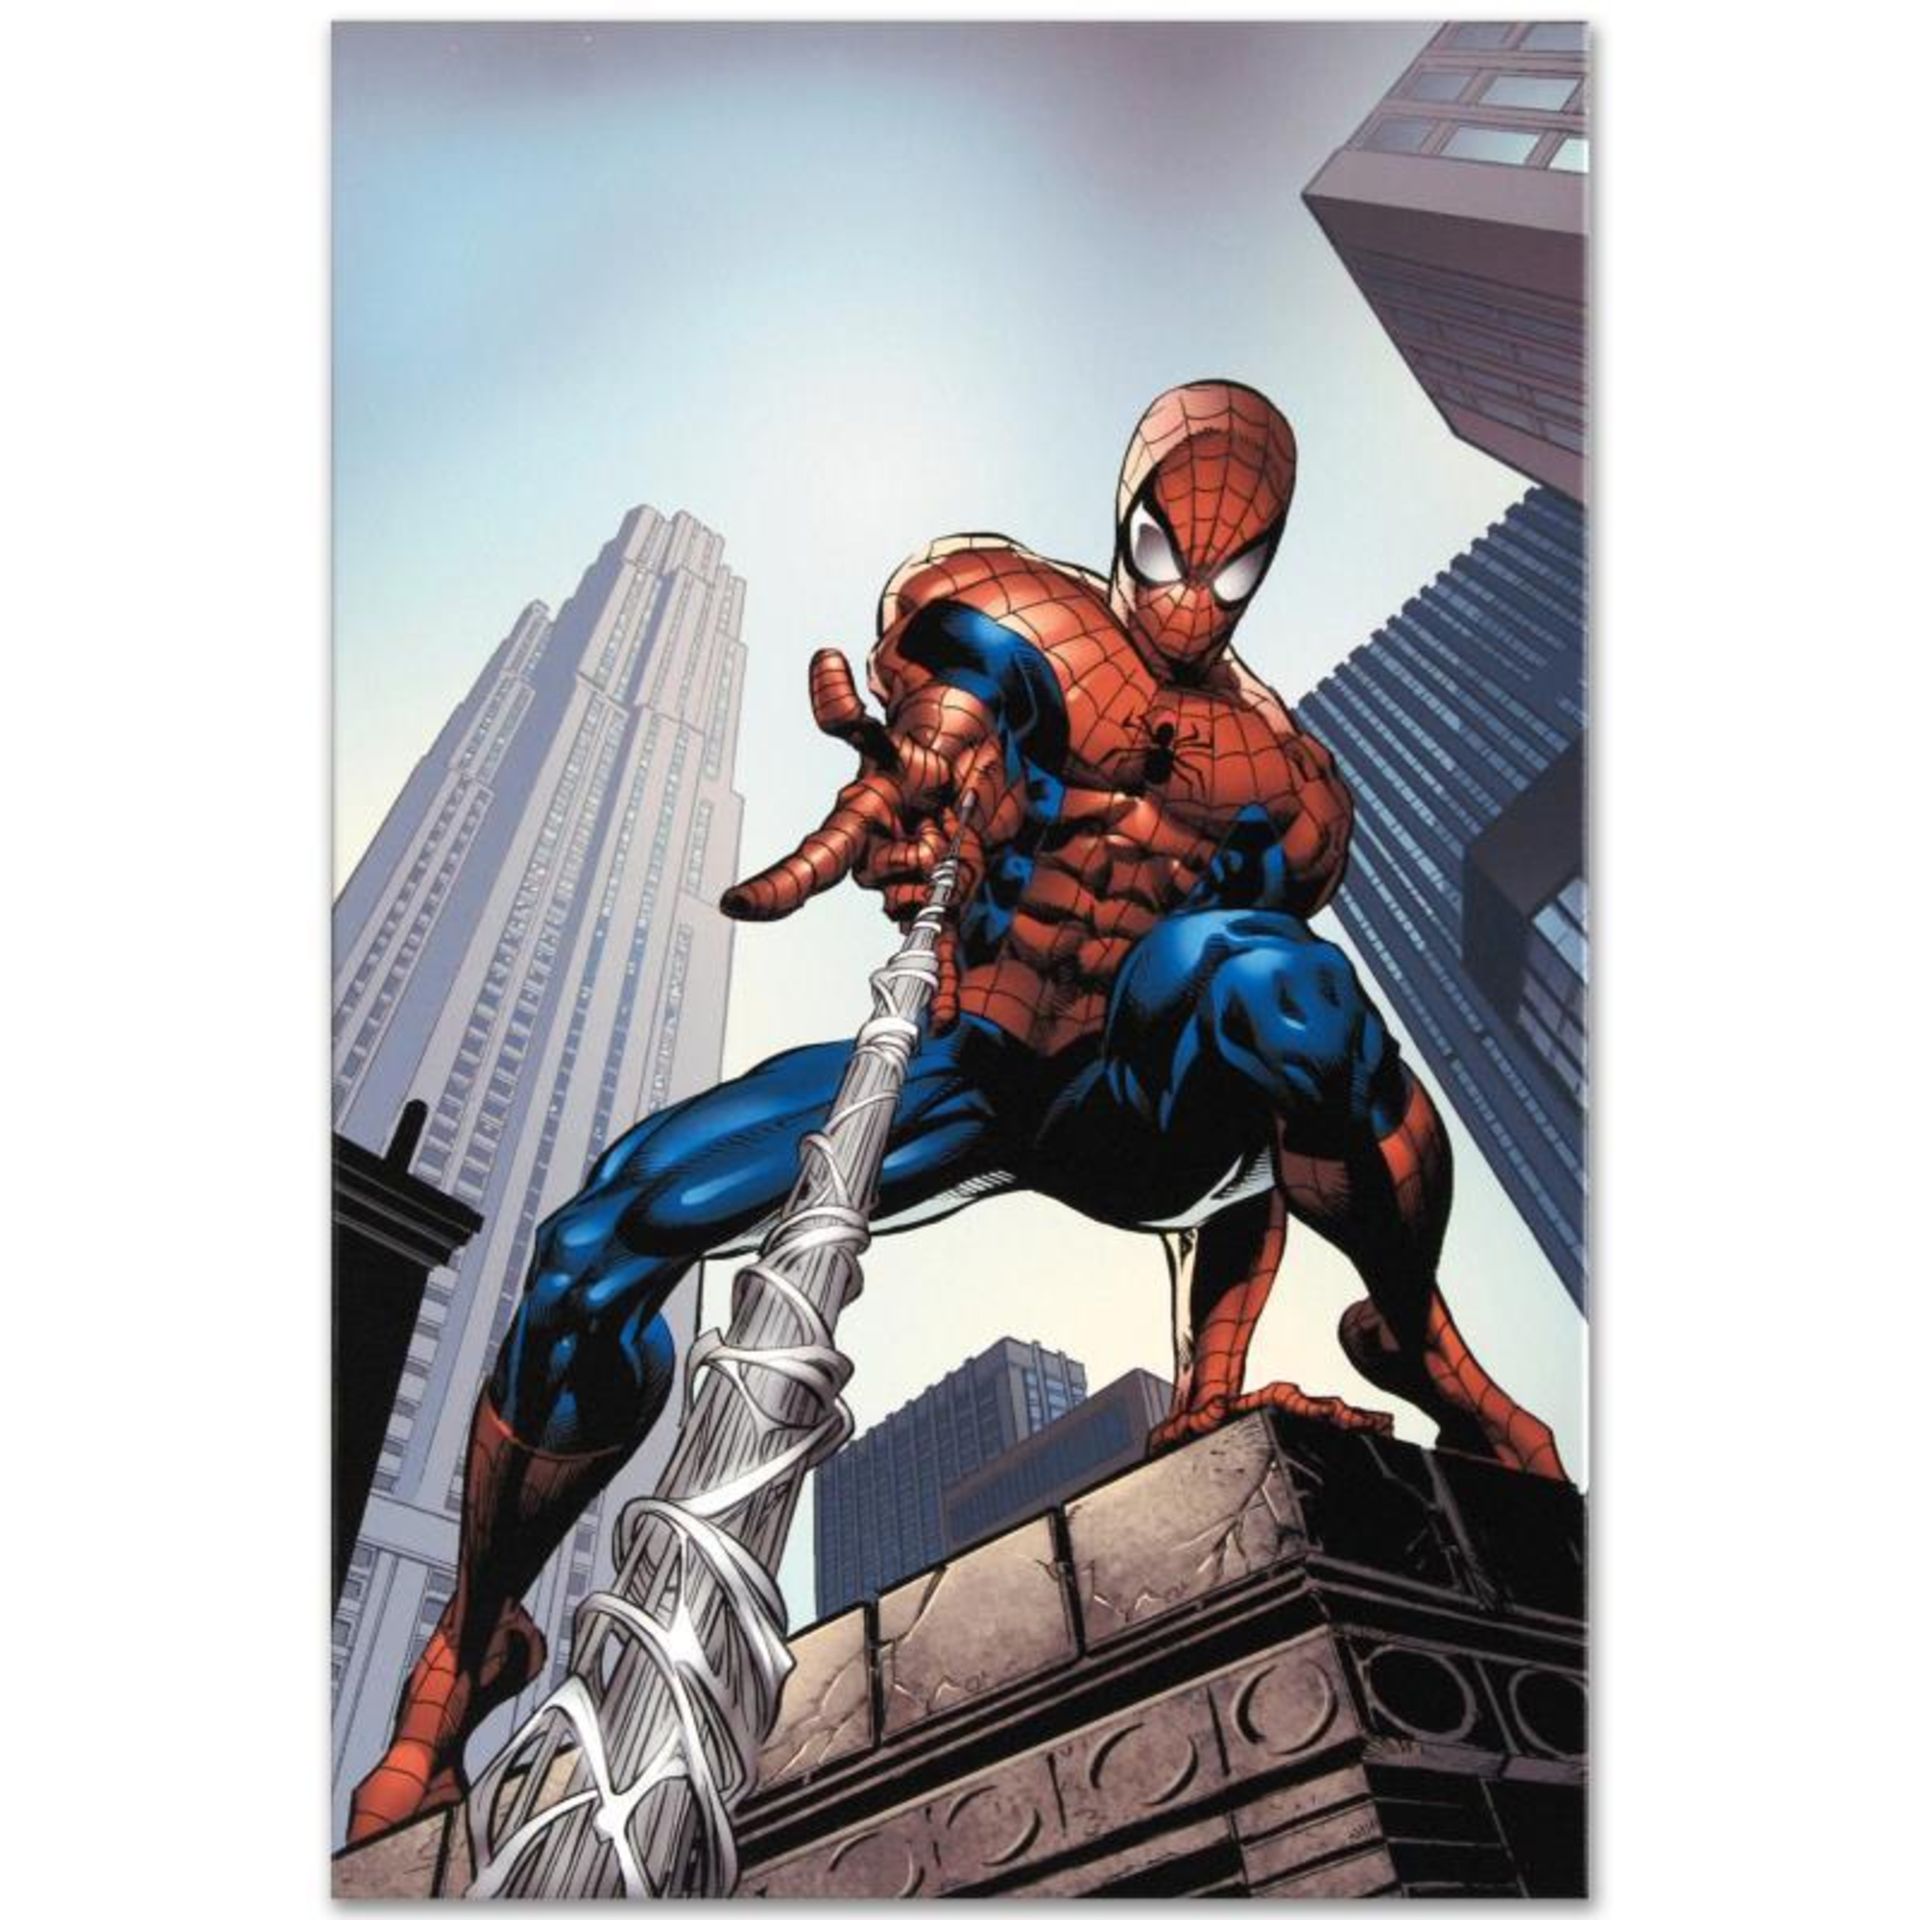 Marvel Comics "Amazing Spider-Man #520" Numbered Limited Edition Giclee on Canva